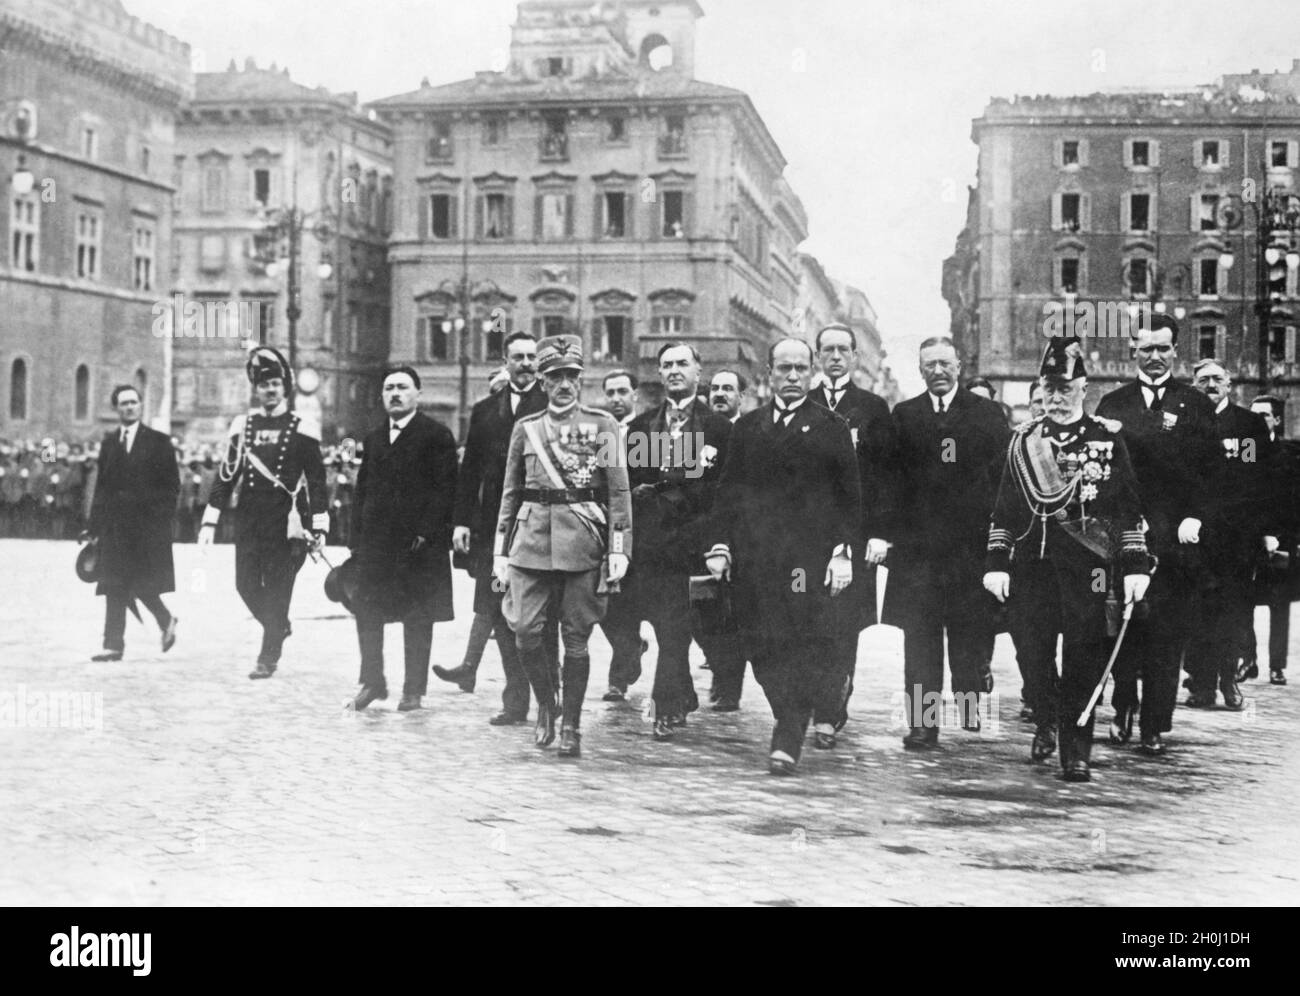 The King of Italy, Victor Emmanuel III. (centre, in uniform), met publicly with Benito Mussolini (right), the new head of government, on 4 November 1922. They are followed by the newly installed cabinet on their way to the Tomb of the Unknown Soldier, after the ministers had previously sworn their inaugural oaths. Some ministers (from left to right): probably Gabriello Carnazza (Minister of Public Works, left behind the King), Luigi Federzoni (Minister of Colonial Affairs, right behind the King) Giuseppe De Capitani d'Arzago (Minister of Agriculture, 2nd from left behind Mussolini) and Grand Stock Photo